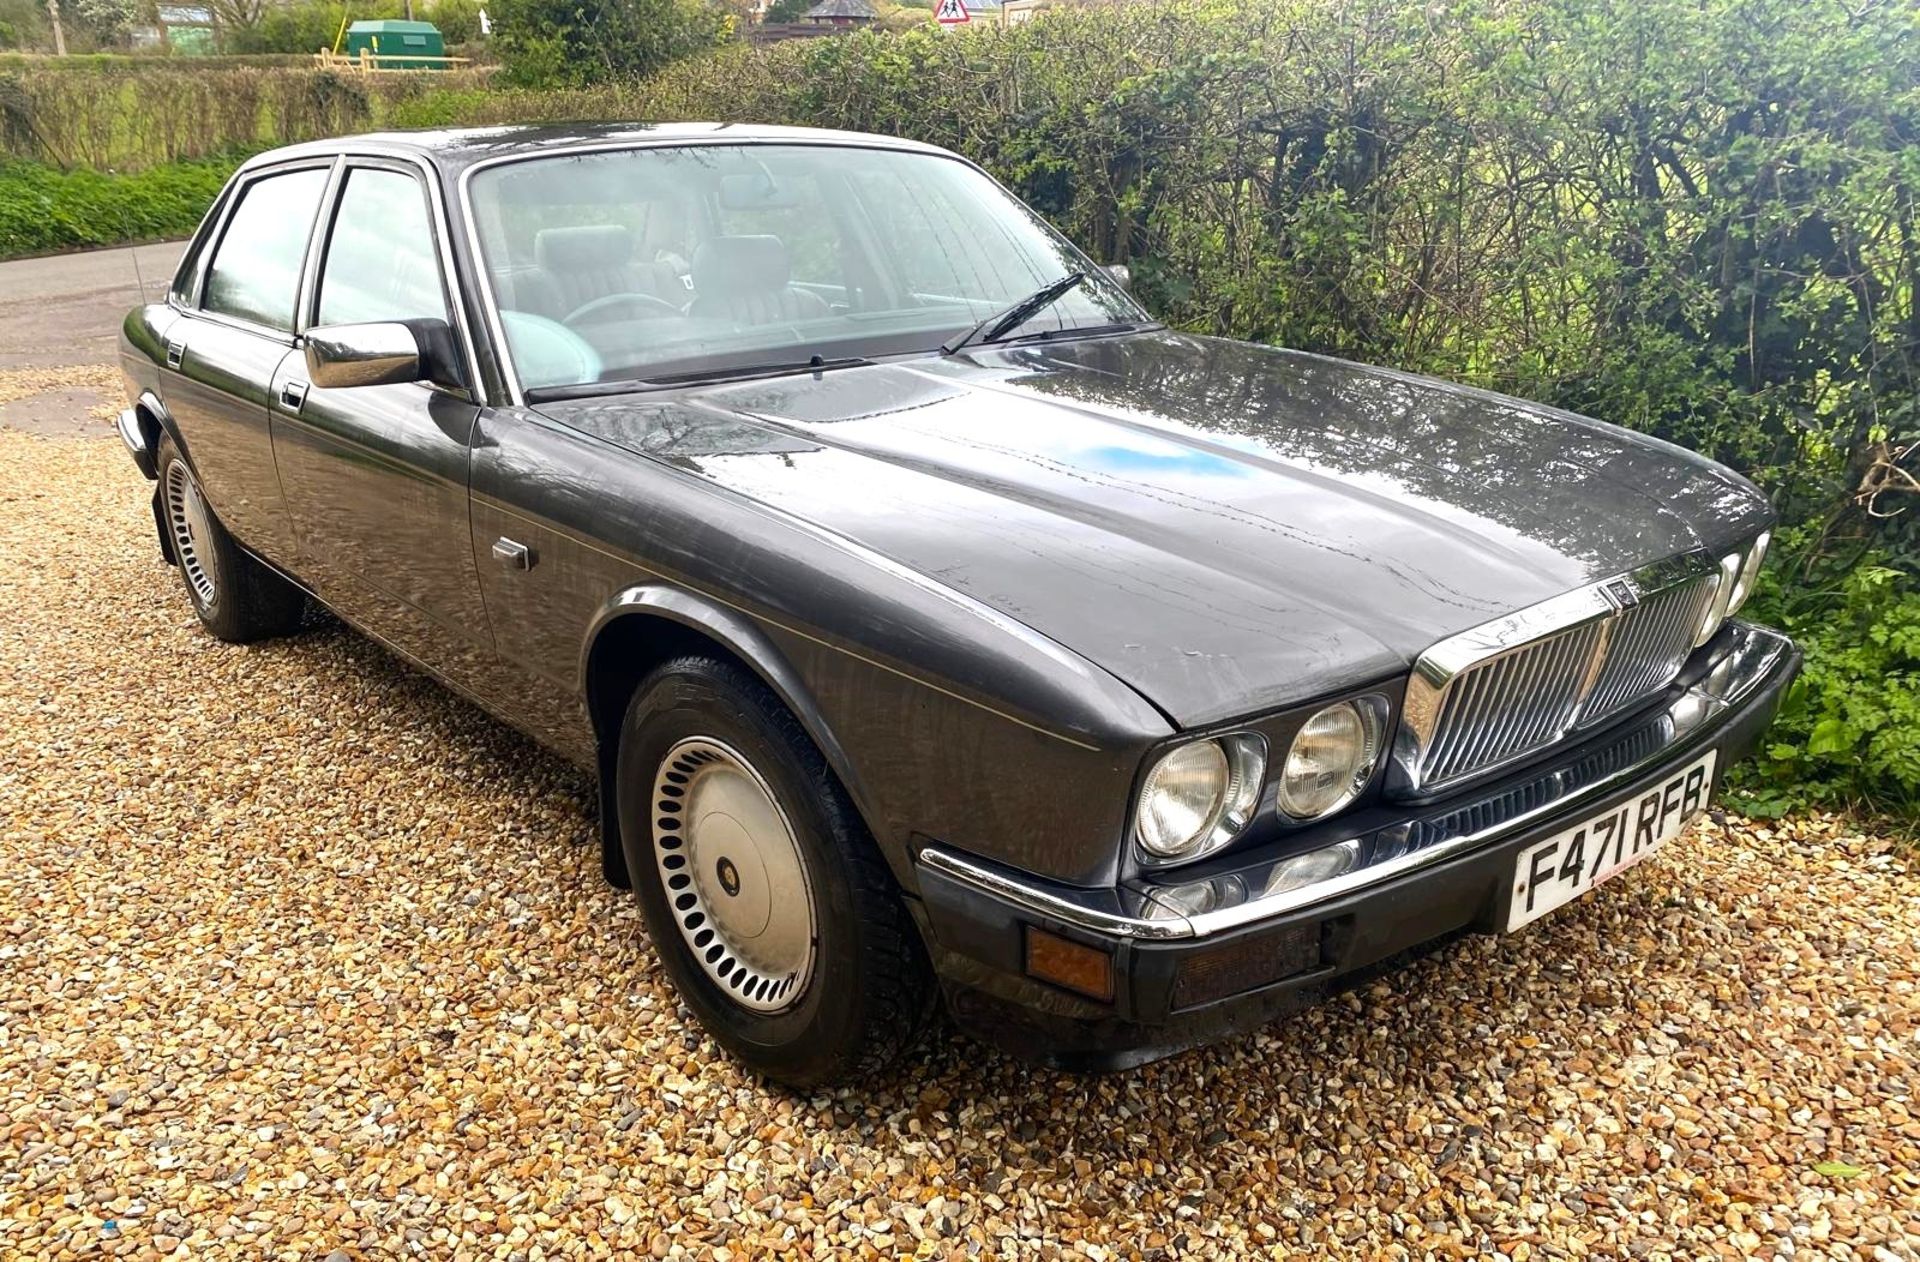 1989 JAGUAR XJ40 3.6 Registration Number: F471 RFB Chassis Number: SAJJFALH3AA576567 Recorded - Image 2 of 8